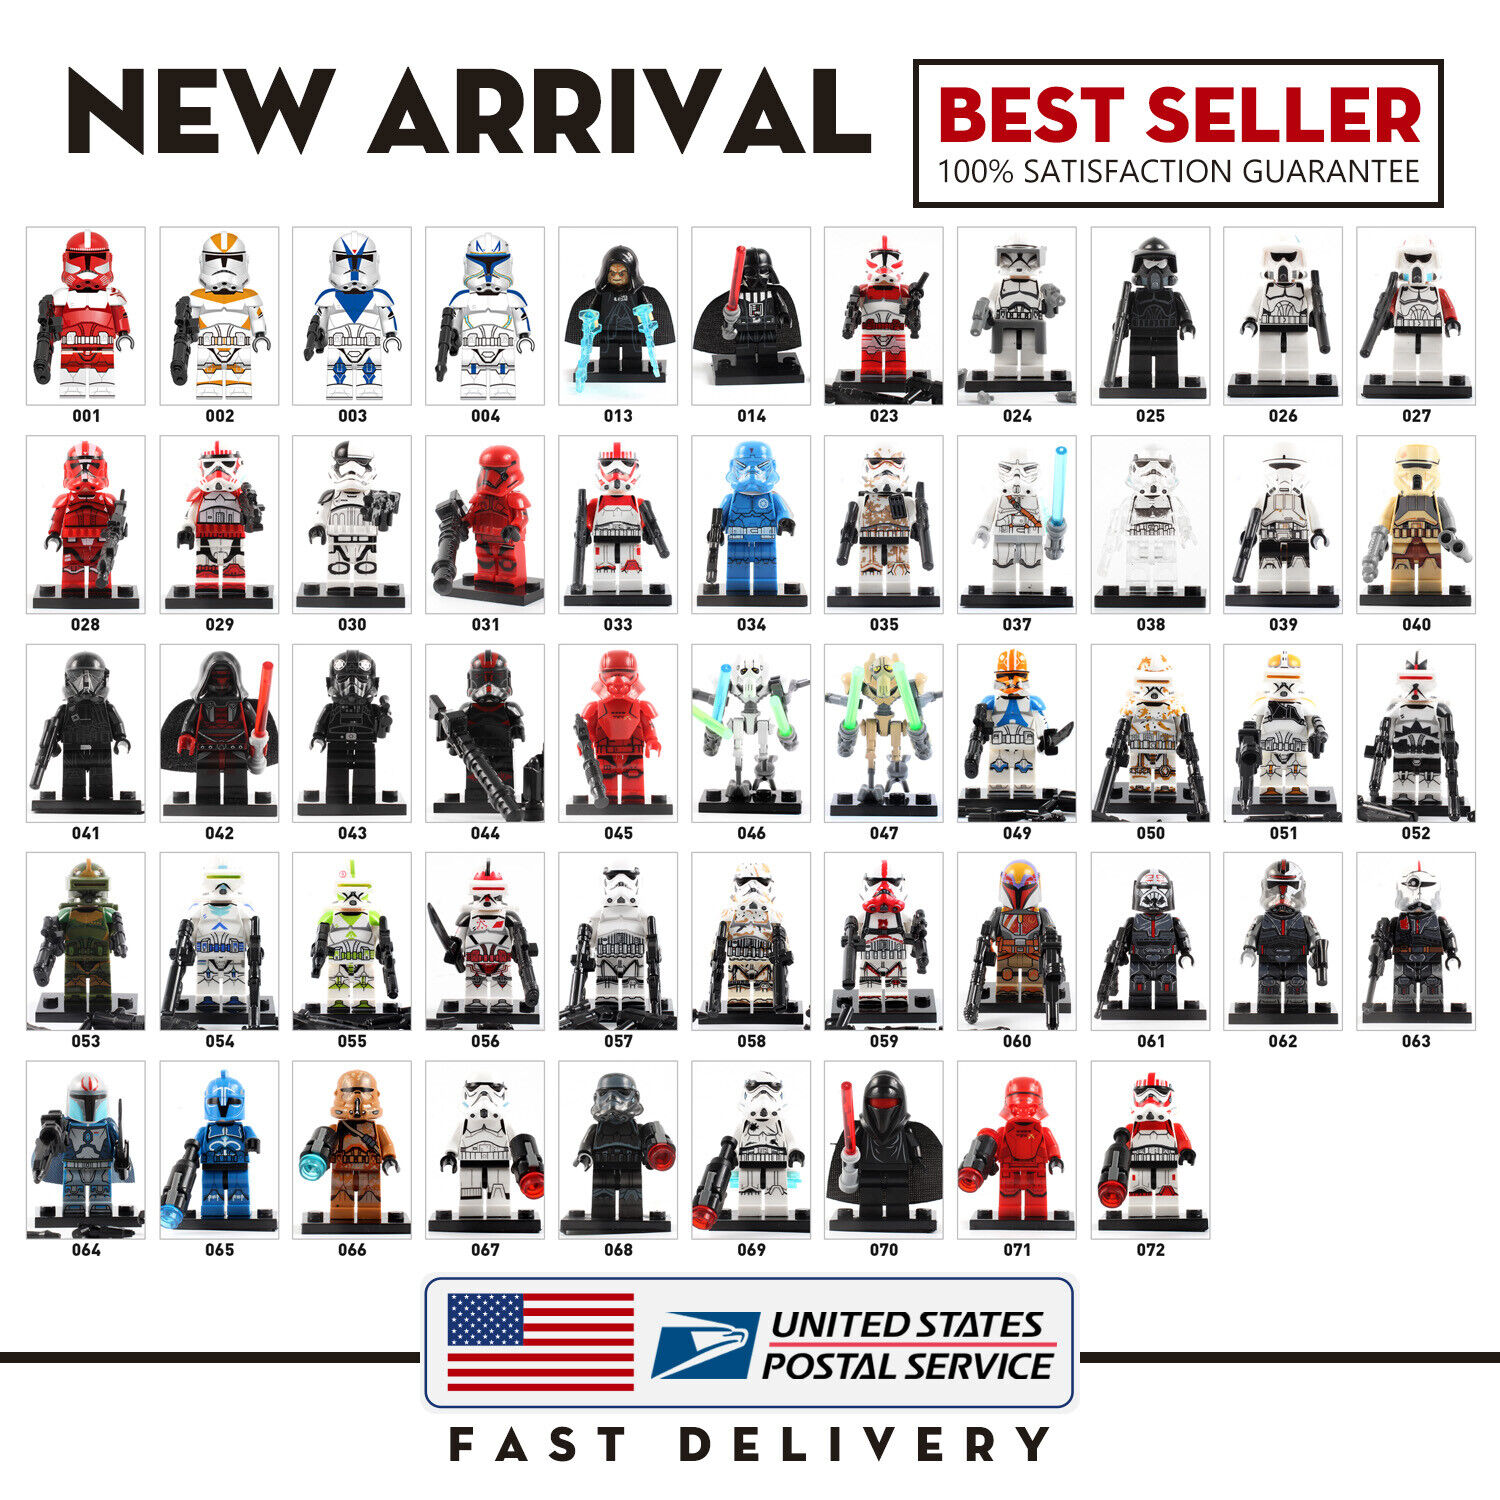 STAR WARS For LEGO Minifigures - Galactic/Imperial Clones, Troopers and Officers